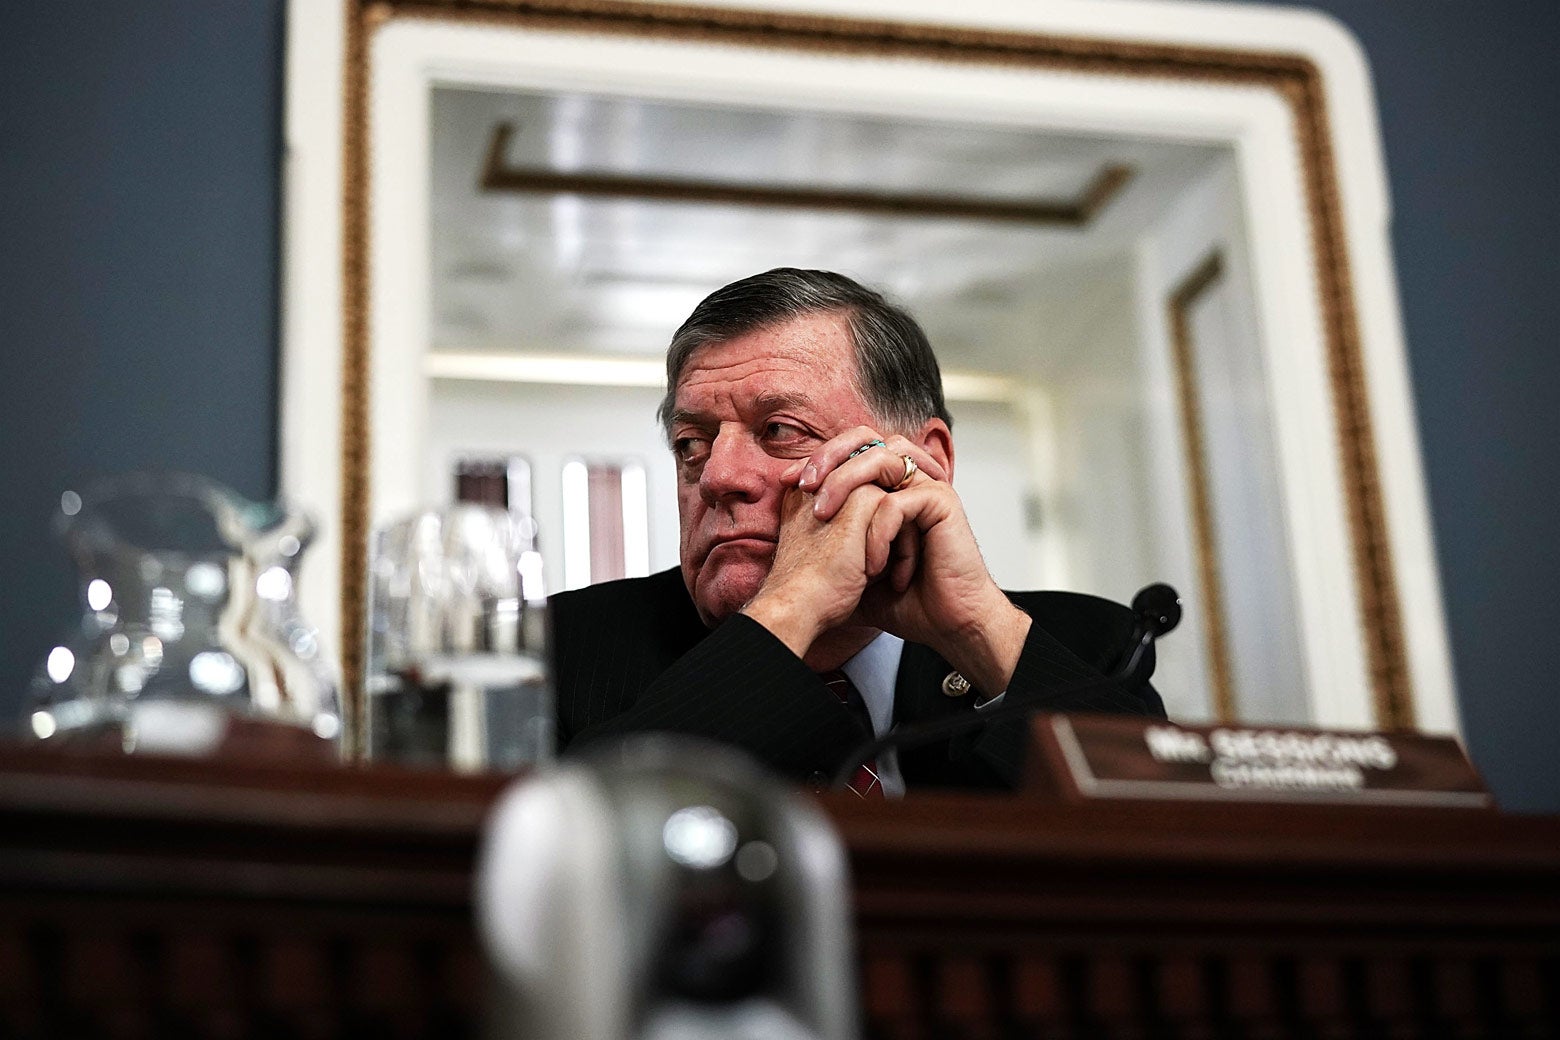 Oklahoma Rep. Tom Cole listens during a meeting about a bill to avert a government shutdown on Dec. 21 at the Capitol in Washington.